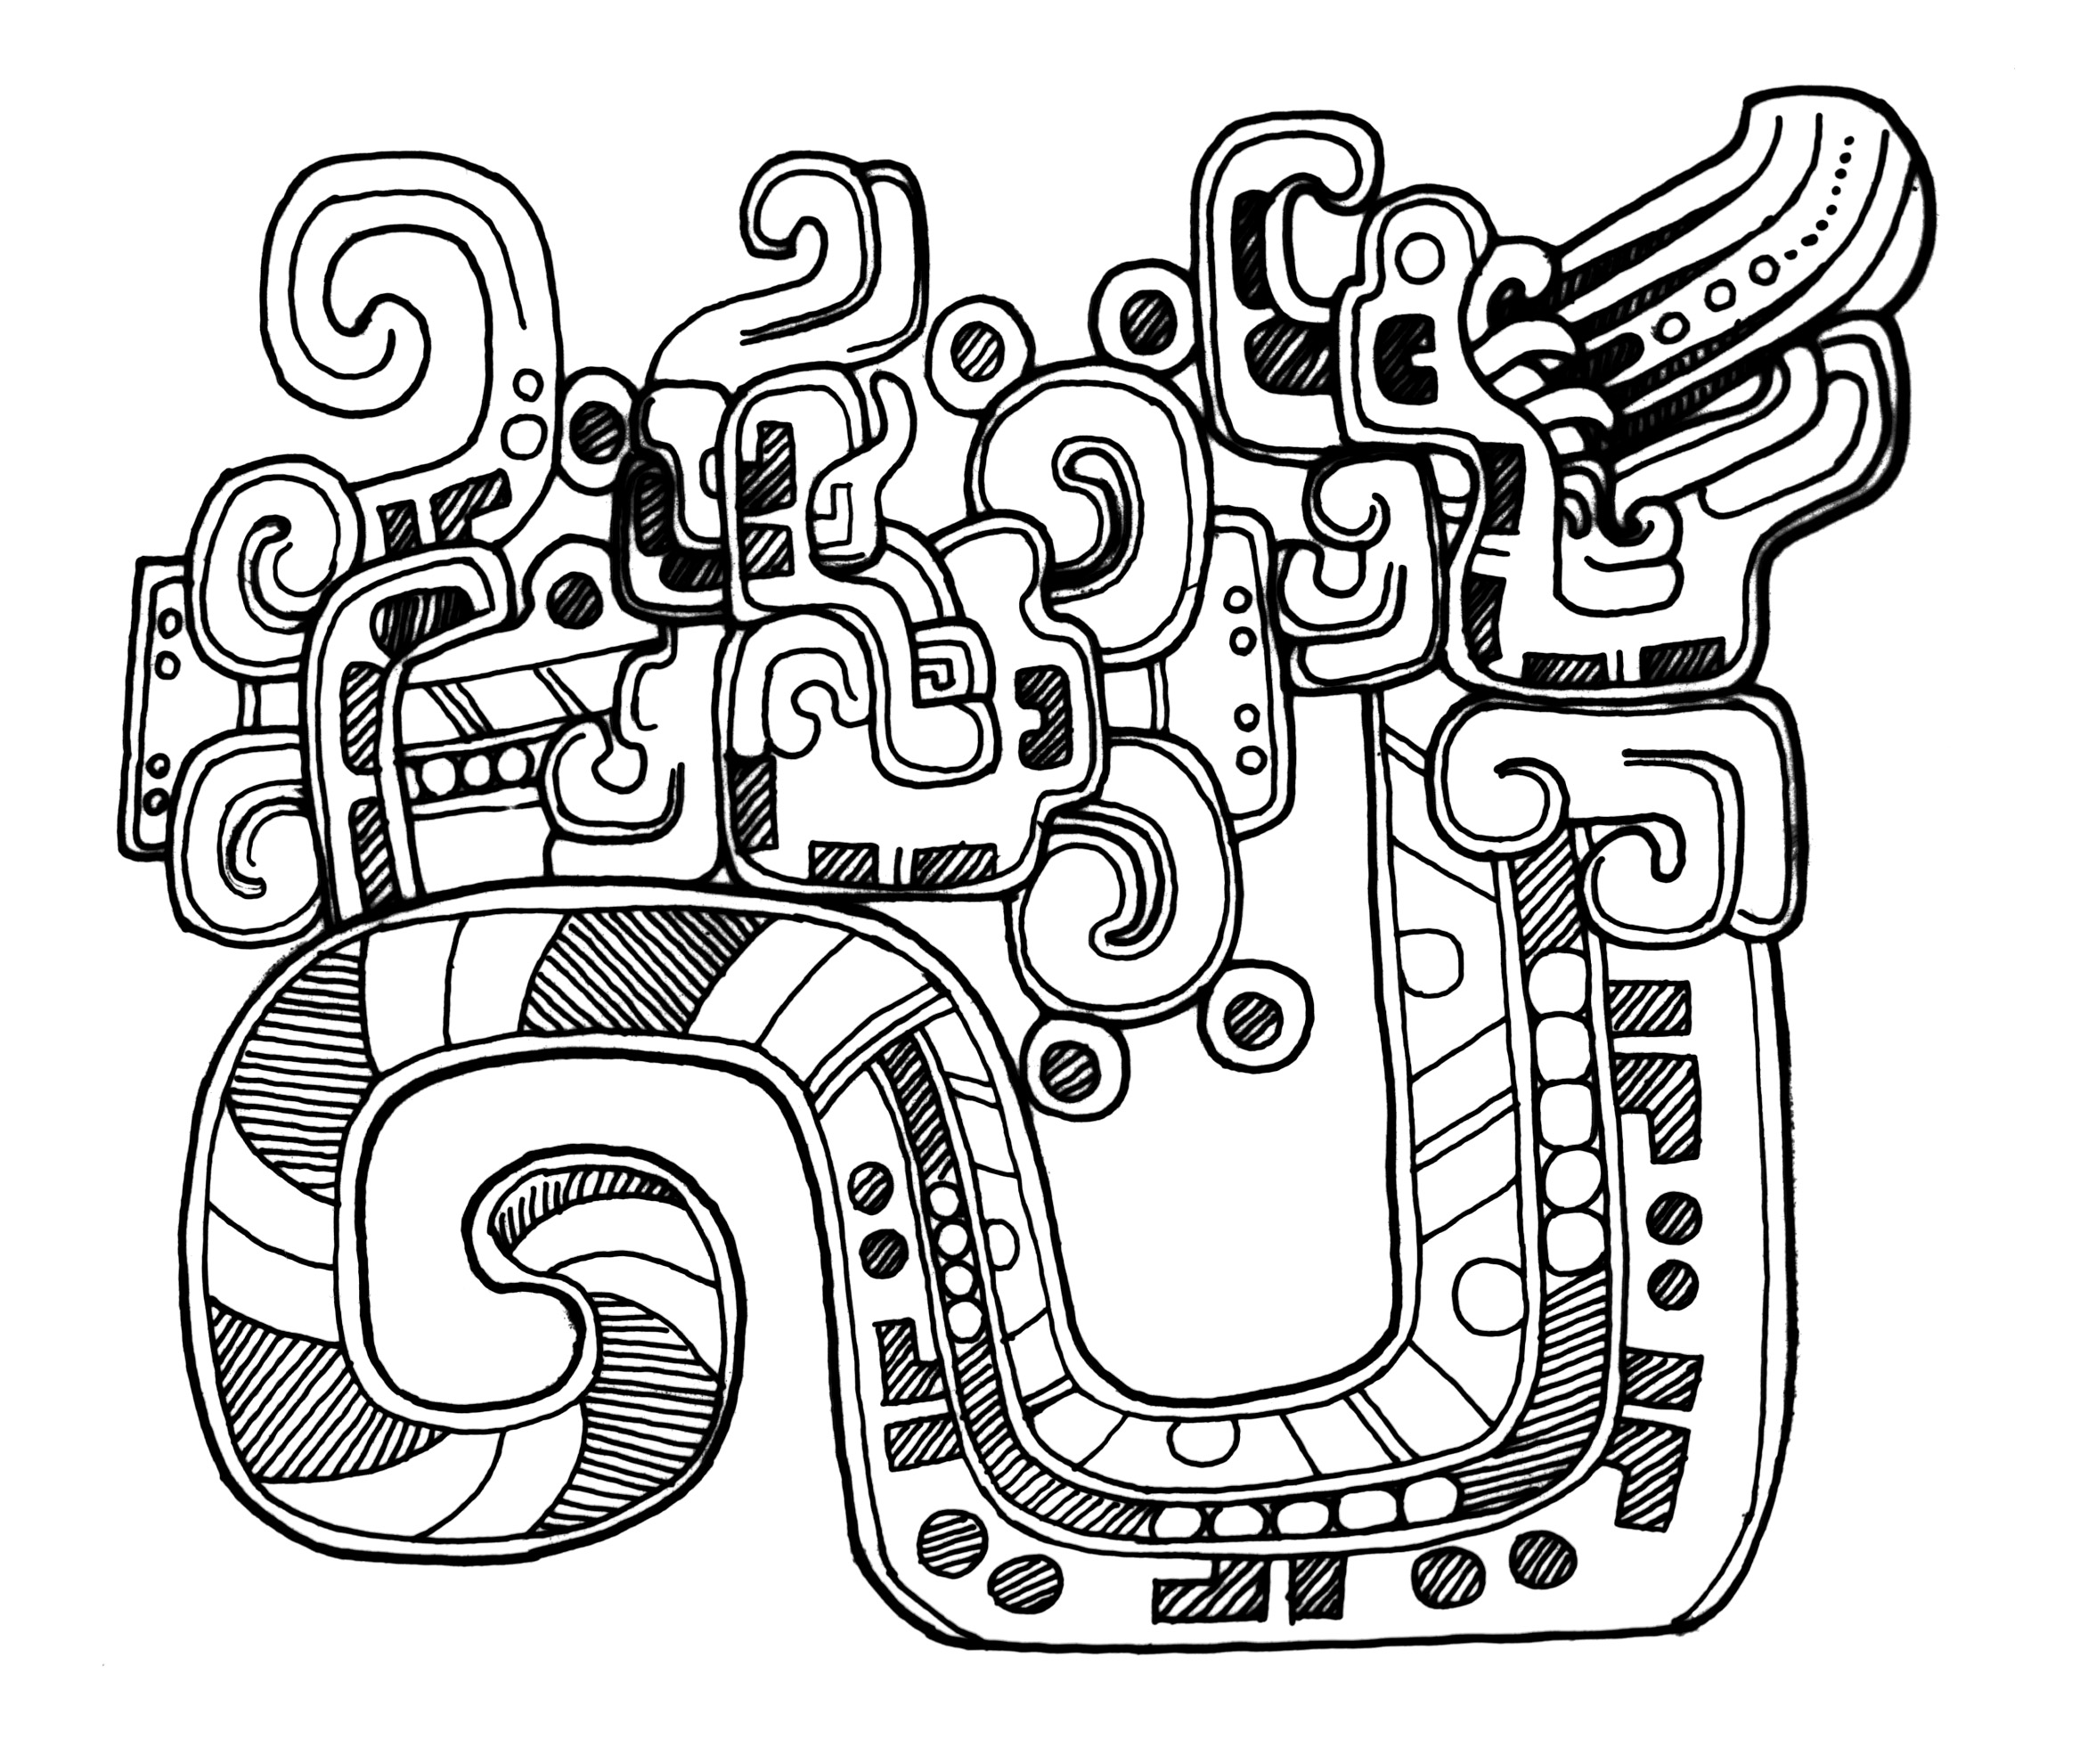 Aztec Coloring Pages Pdf to Print - Free Printable Aztec Coloring Pages